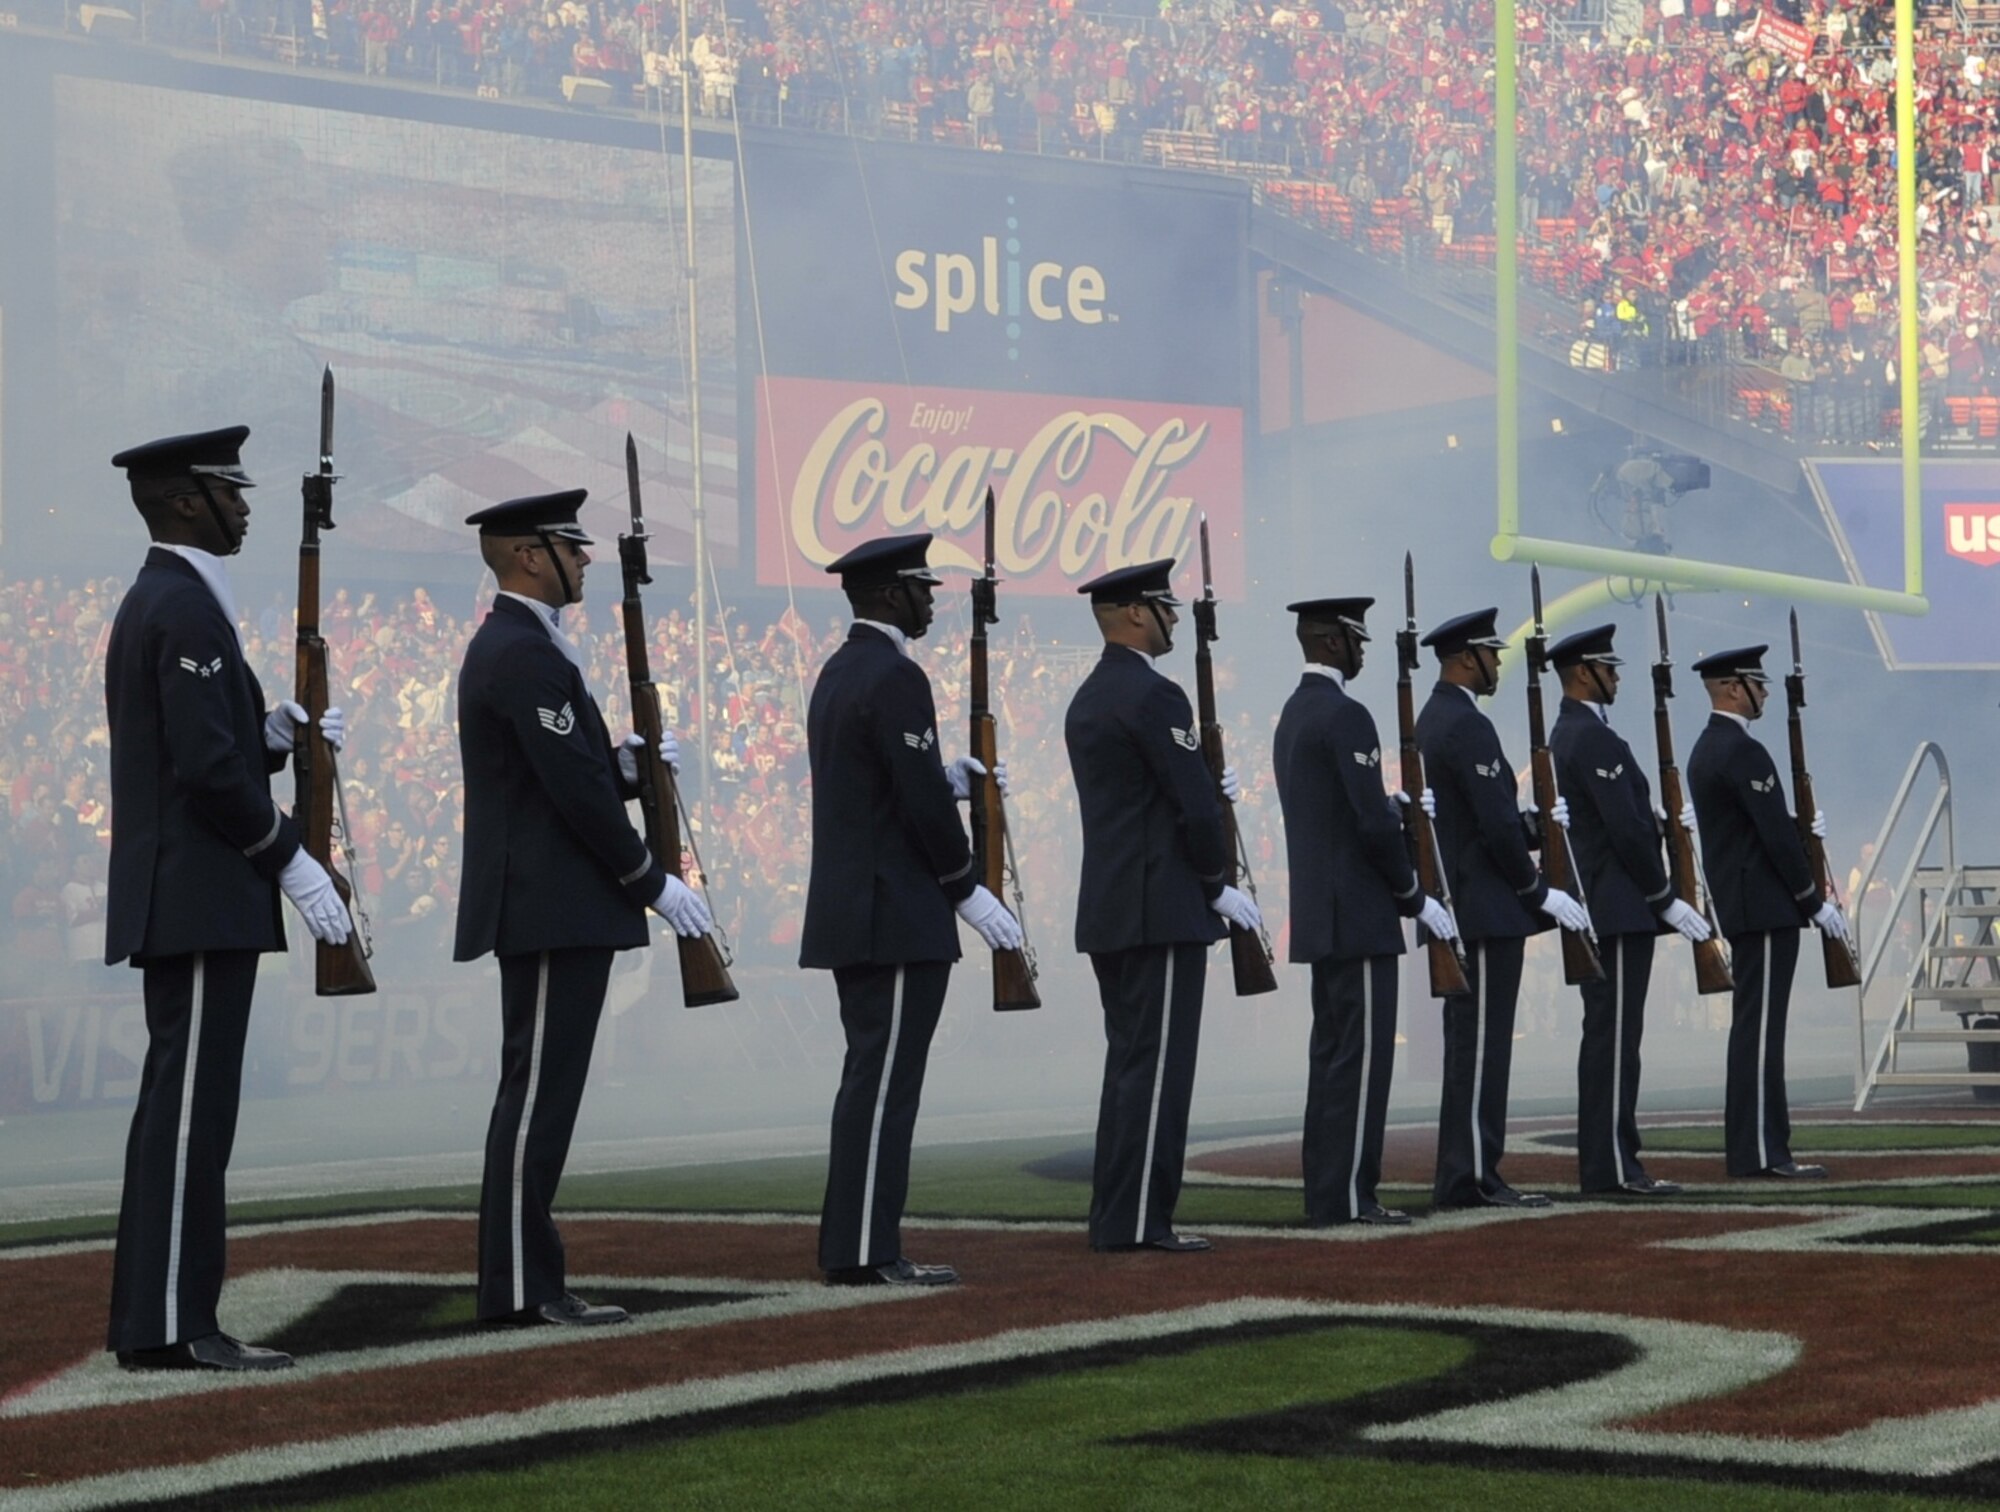 U.S. Air Force Honor Guard Drill Team members stand at attention prior to the National Anthem at the Detroit Lions vs. San Francisco 49ers NFL football game at Candlestick Park in San Francisco, Calif., Sept. 16, 2012.  The Drill Team performed in front of more than 500 people during a pre-game drill and stood on the field in front of a sold-out crowd.  (U.S. Air Force photo by Senior Master Sgt. Adam M. Stump)